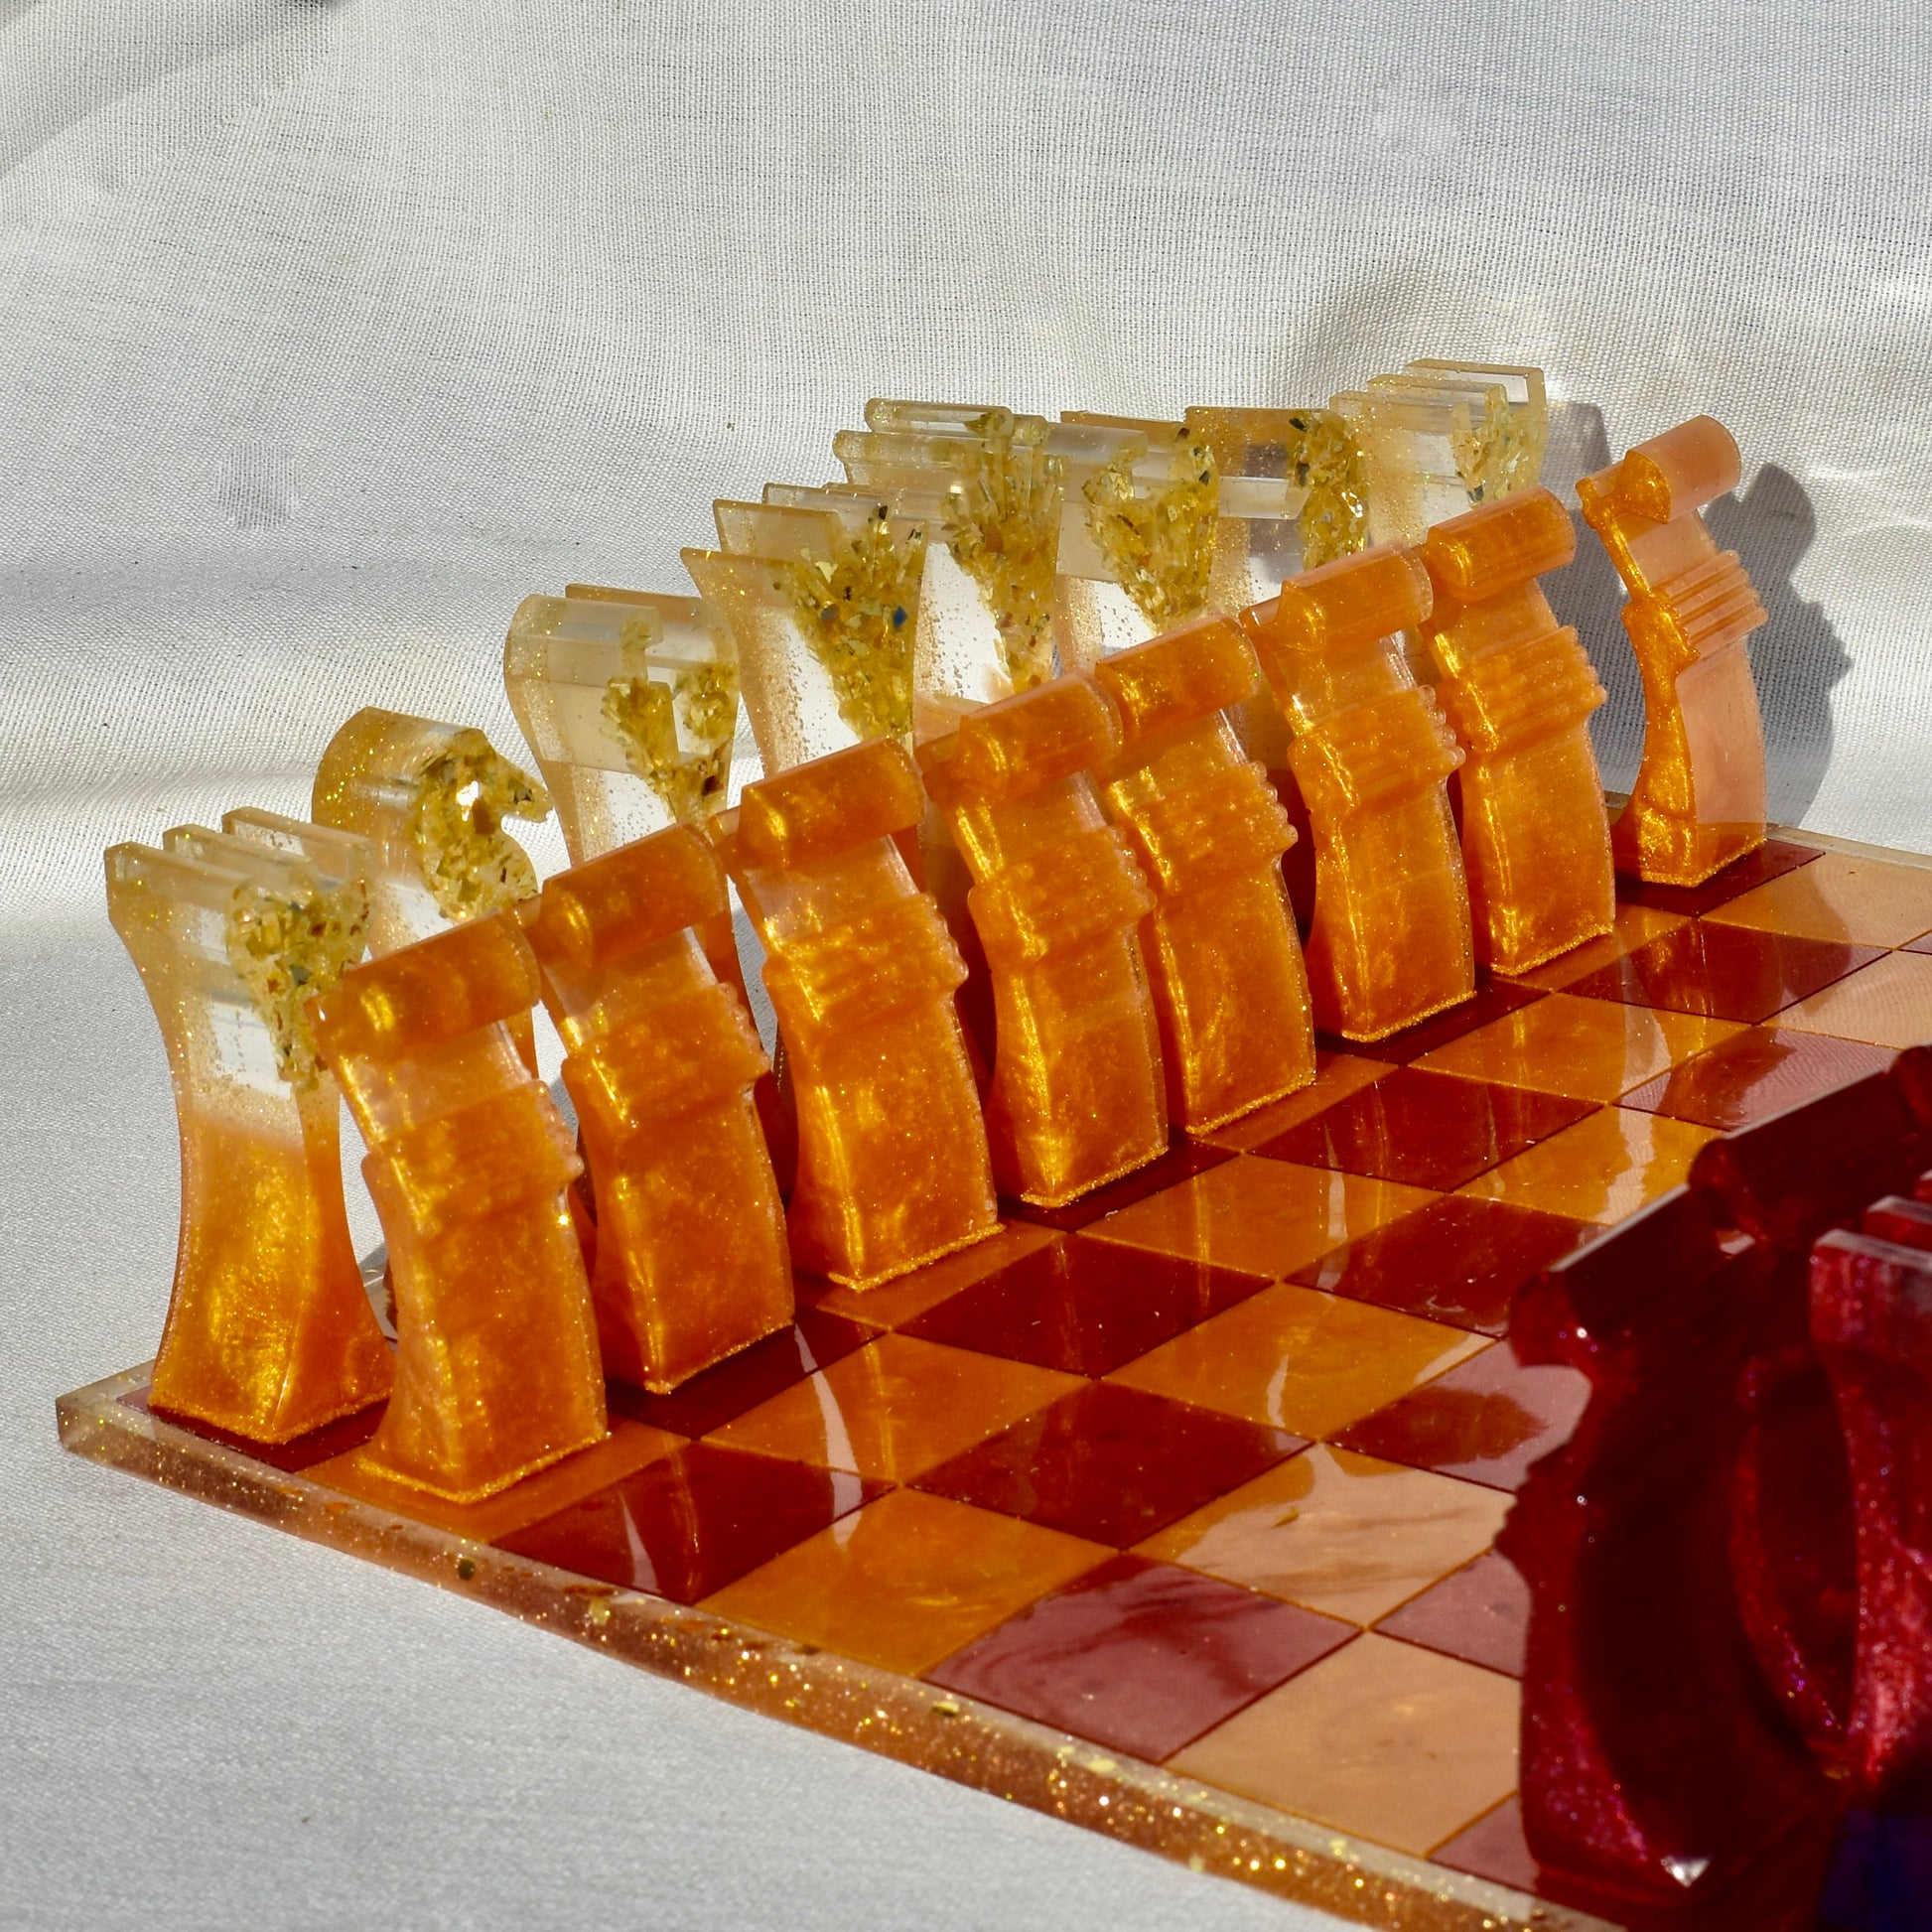 How to Make a Bespoke Chess Set in Under an Hour - Resin Obsession